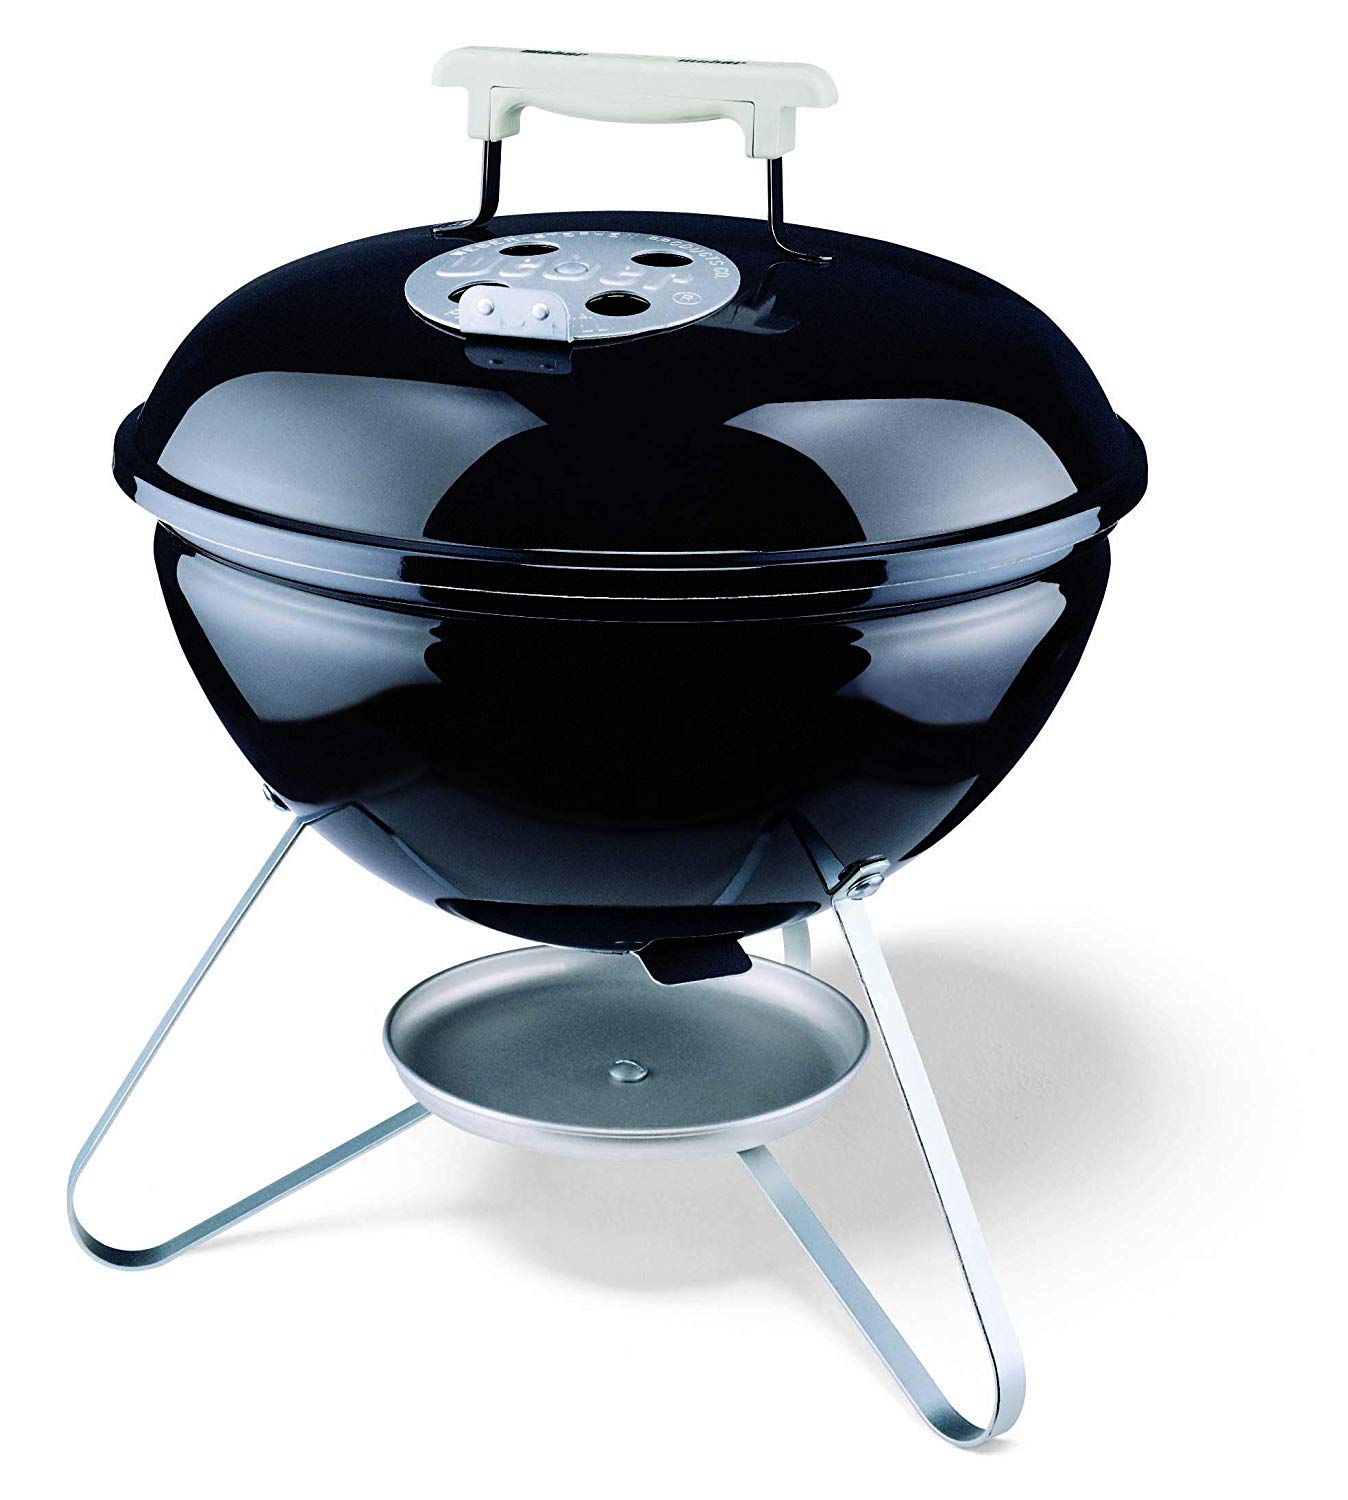 An image of Weber 10020 Charcoal Porcelain-Enameled Grill | KnowYourGrill 